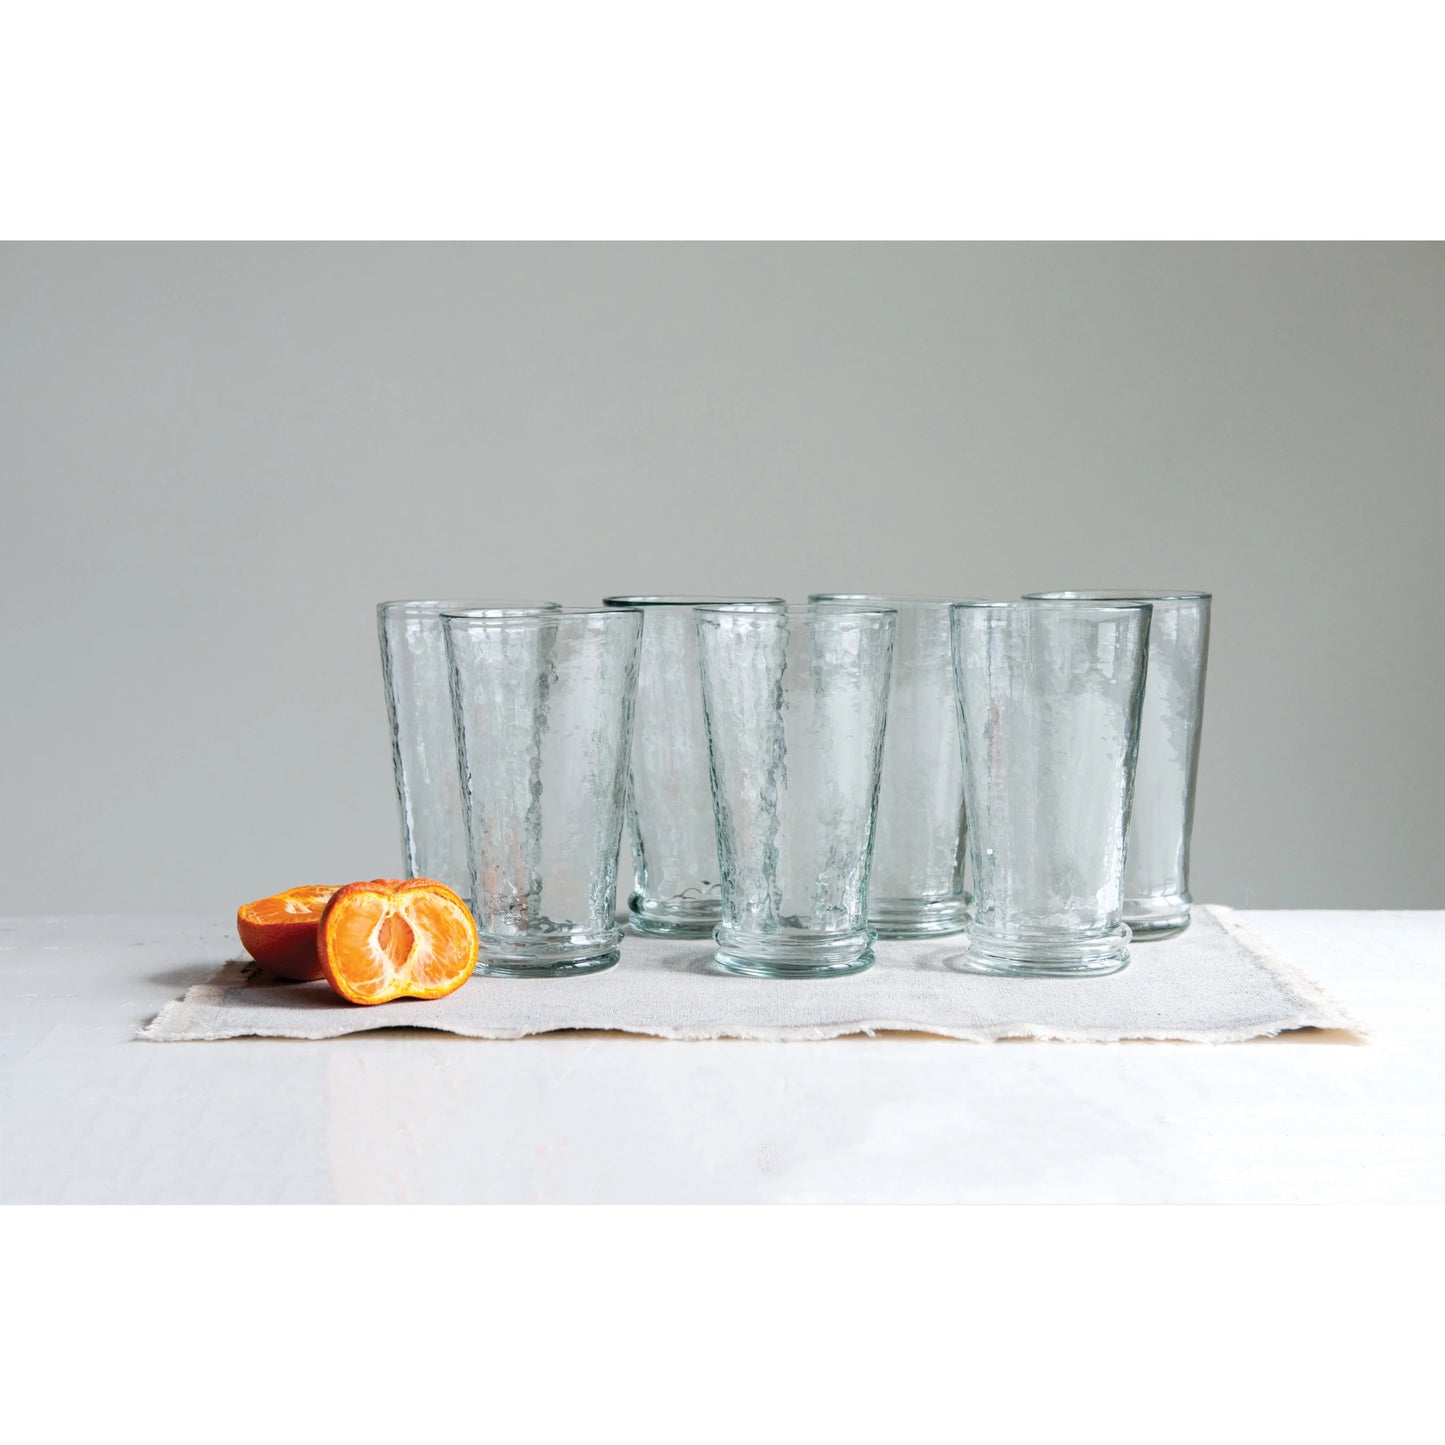 multiple recycled glass drinking glasses displayed next to sliced fruit on a placemat against a light gray wall